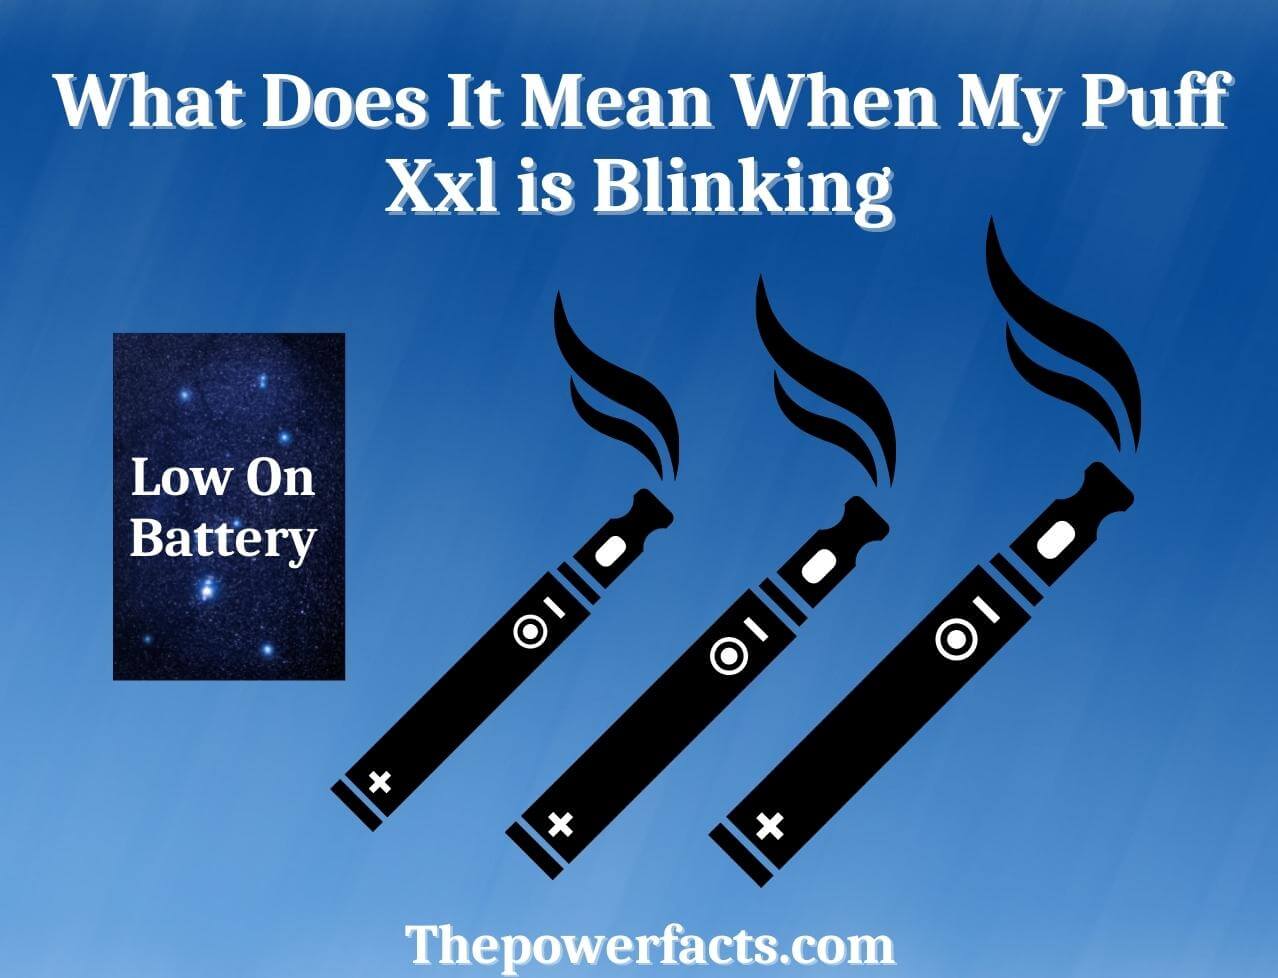 what does it mean when my puff xxl is blinking